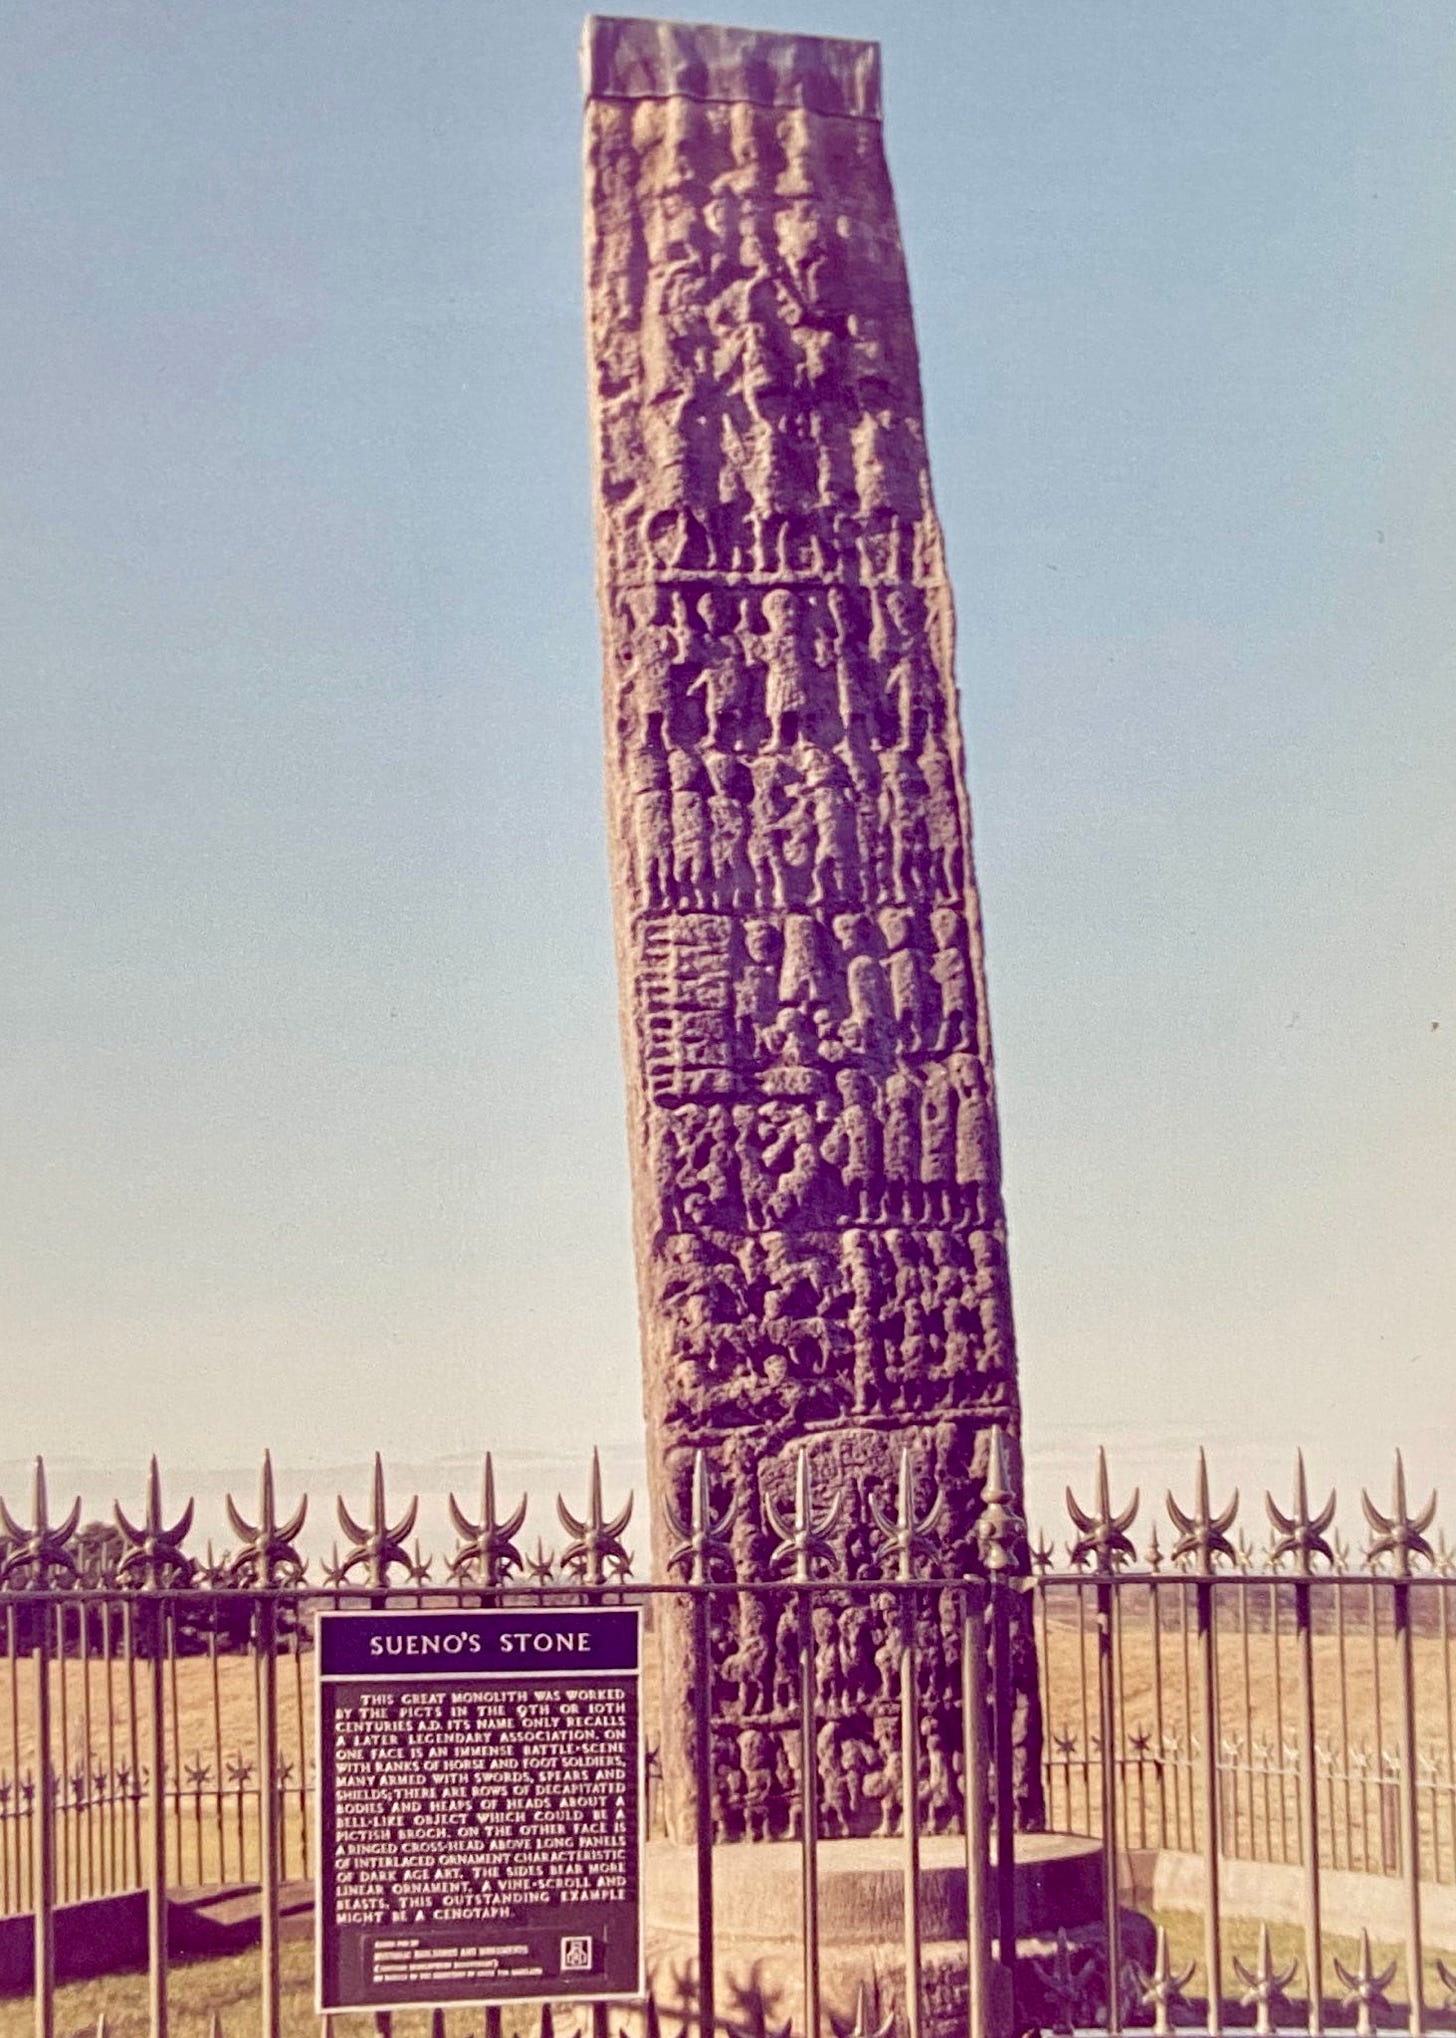 Photo of Sueno’s Stone near Forres, taken in the 1980s by Ronnie Nielson. Photo shows the east face of the stone with its tiers of battle scenes.